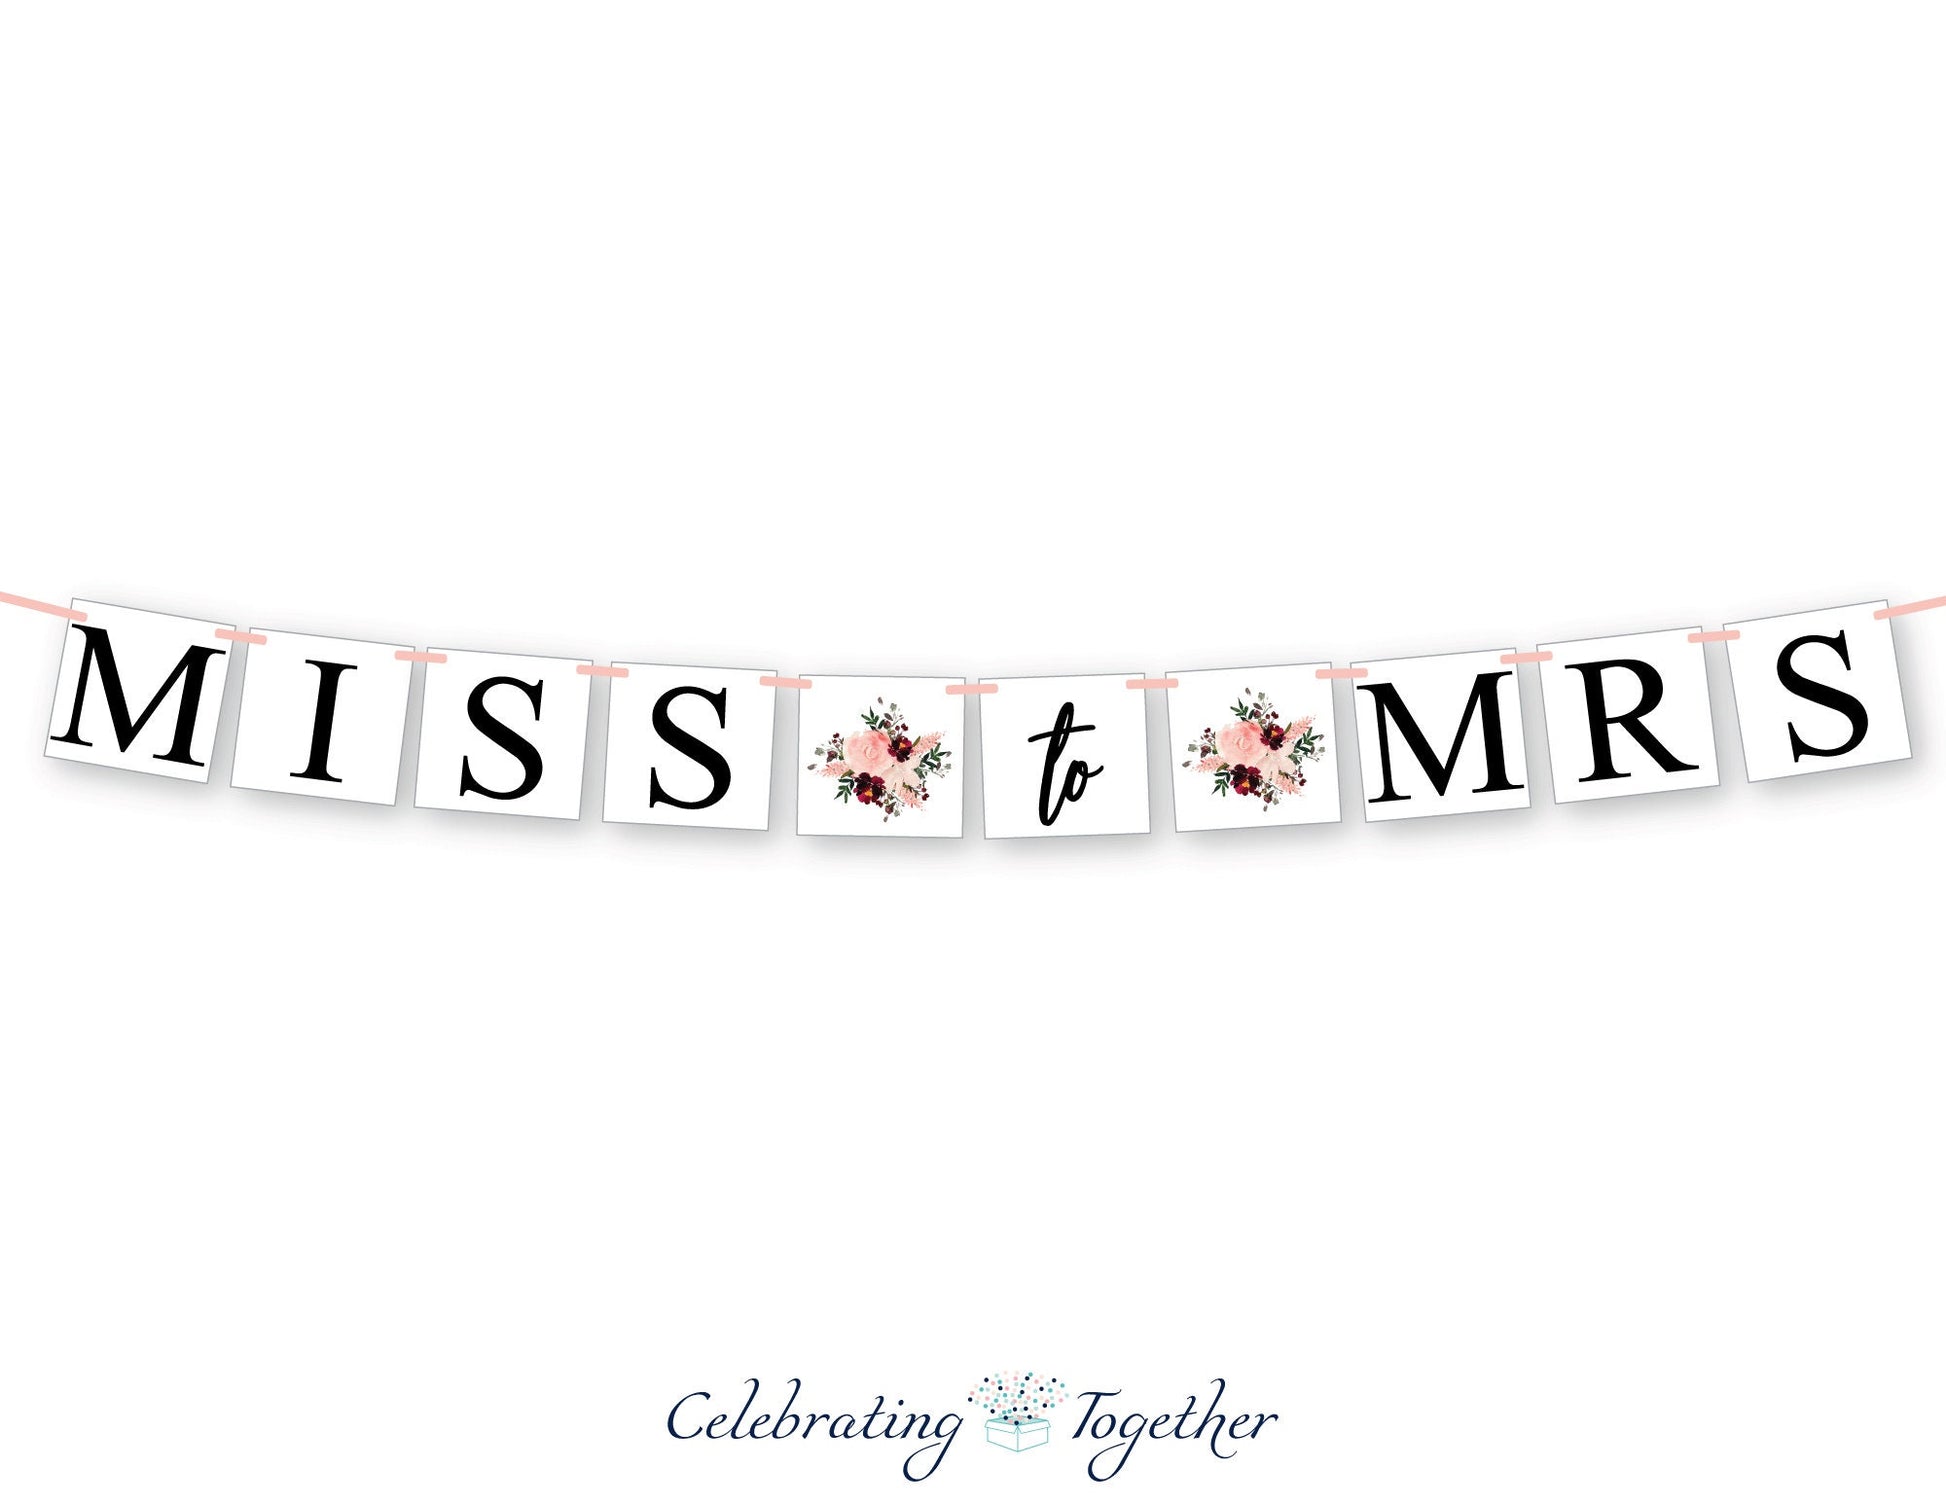 miss to mrs banner - watercolor bridal shower decorations